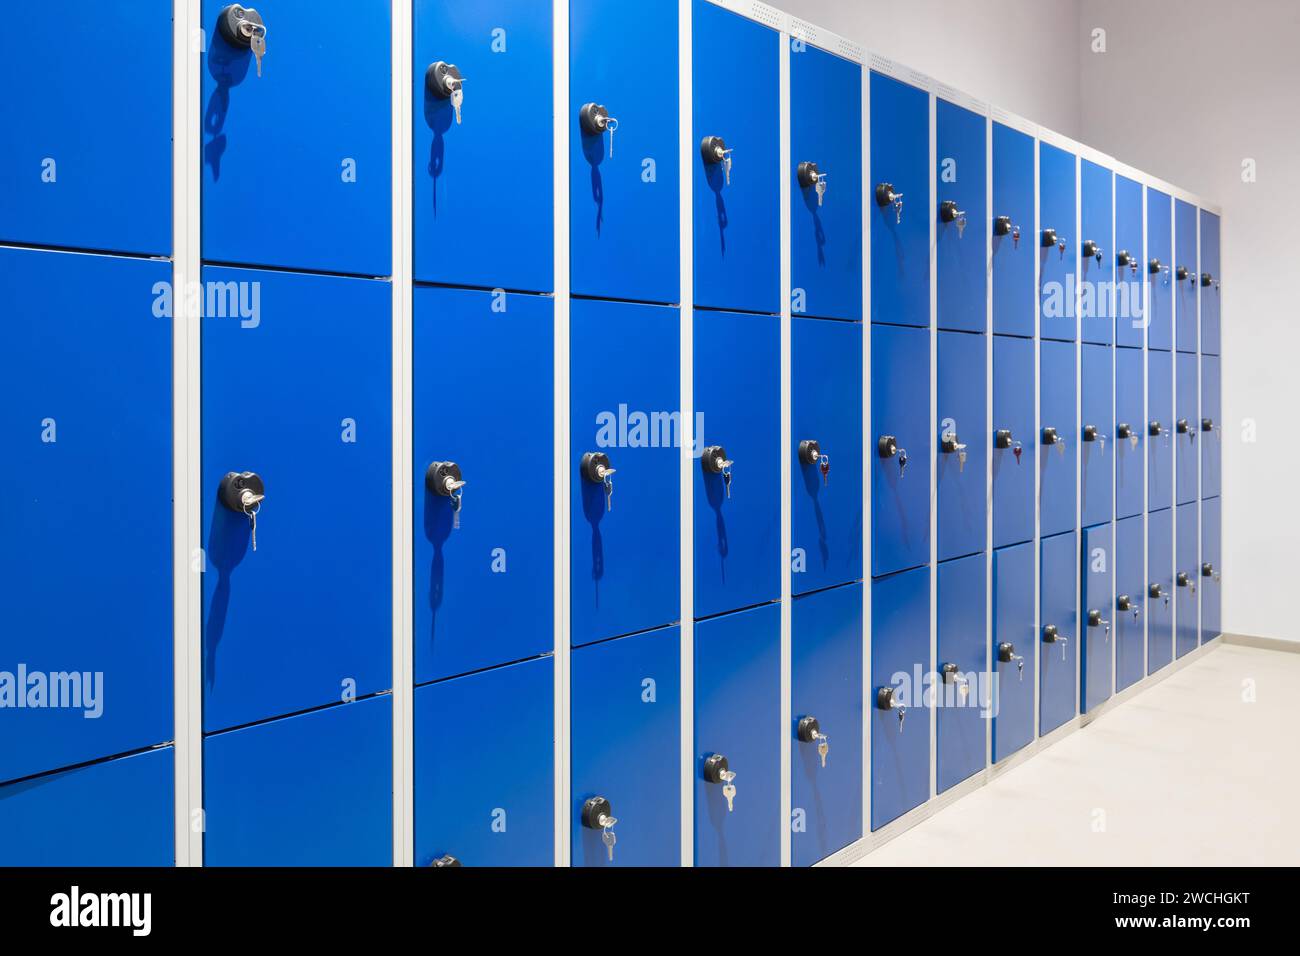 hi-res and images - stock Metallic Alamy lockers photography